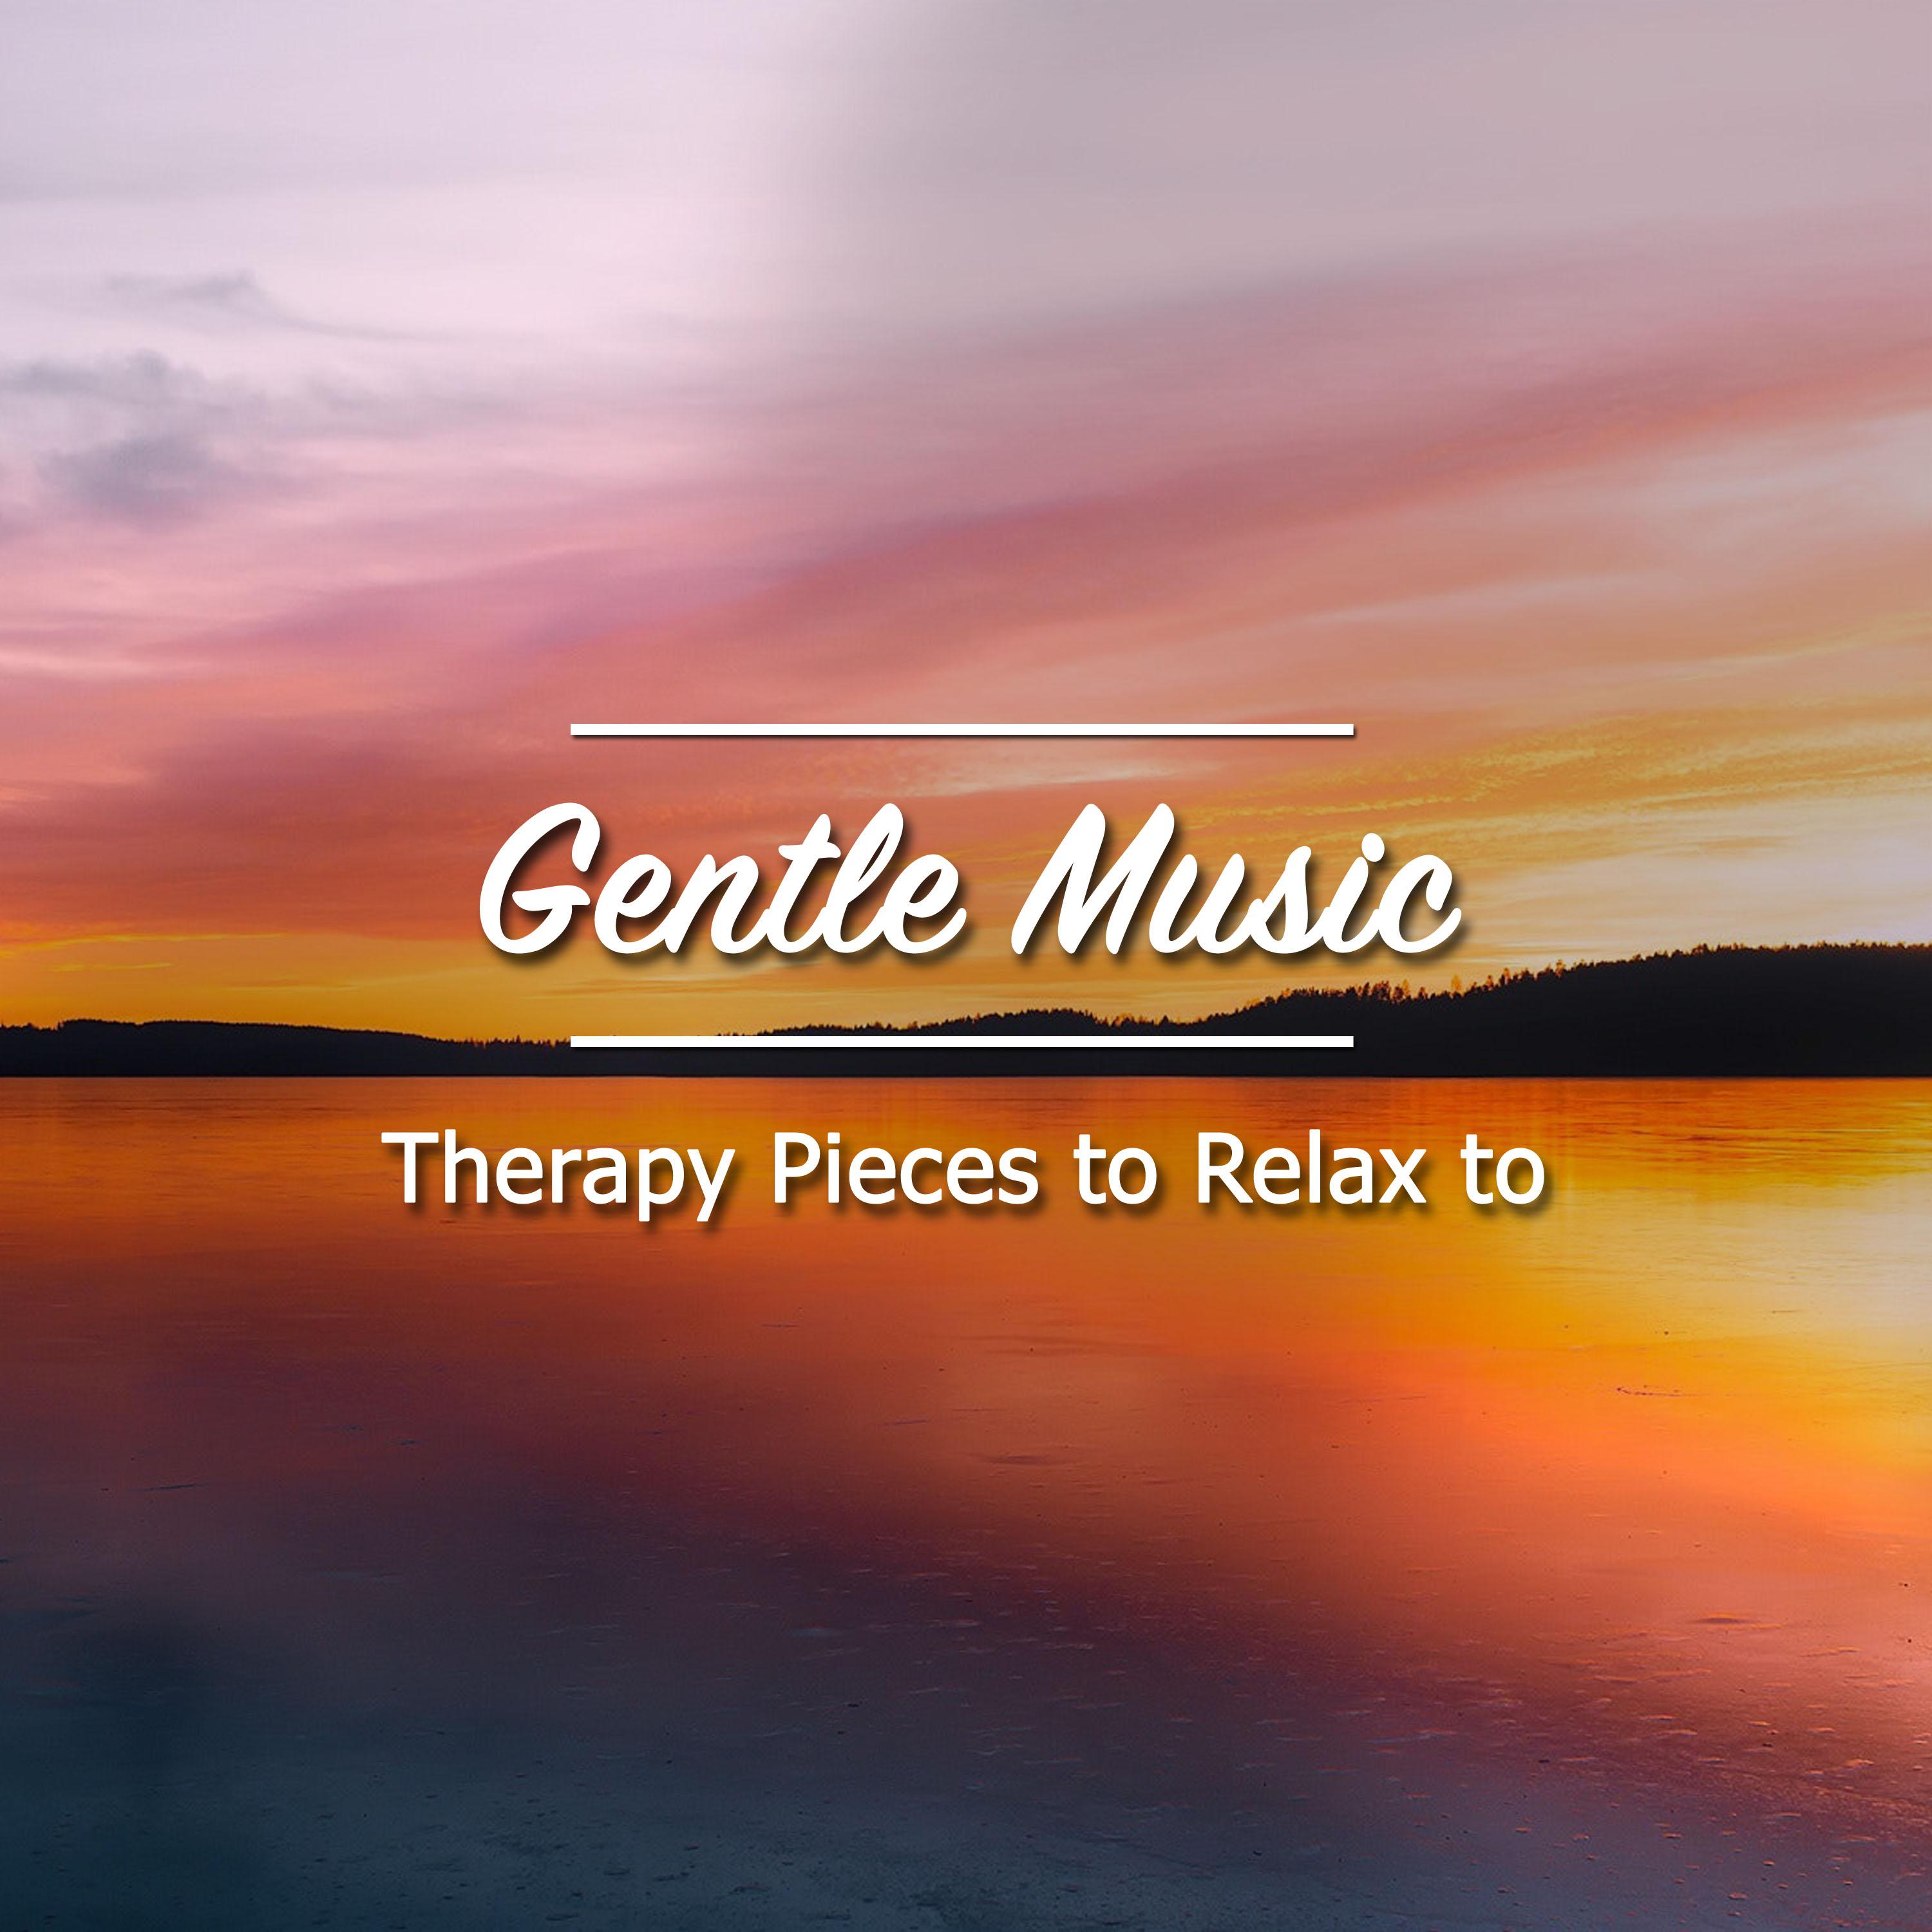 16 Gentle Music Therapy Pieces to Relax to